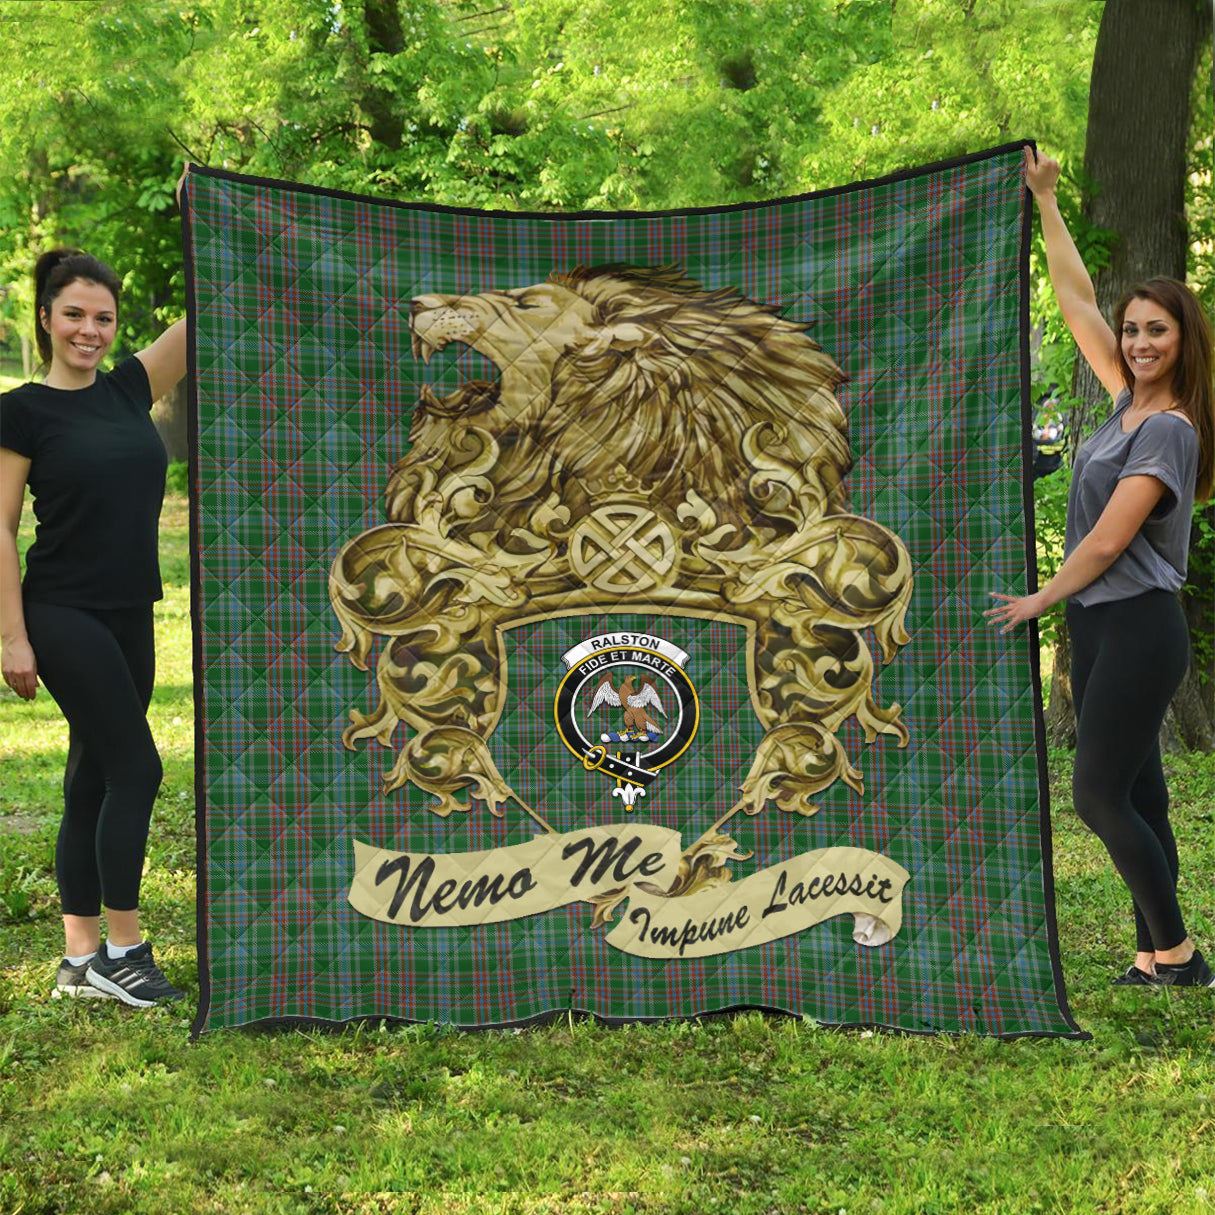 ralston-usa-tartan-quilt-with-motto-nemo-me-impune-lacessit-with-vintage-lion-family-crest-tartan-quilt-pattern-scottish-tartan-plaid-quilt-vintage-style